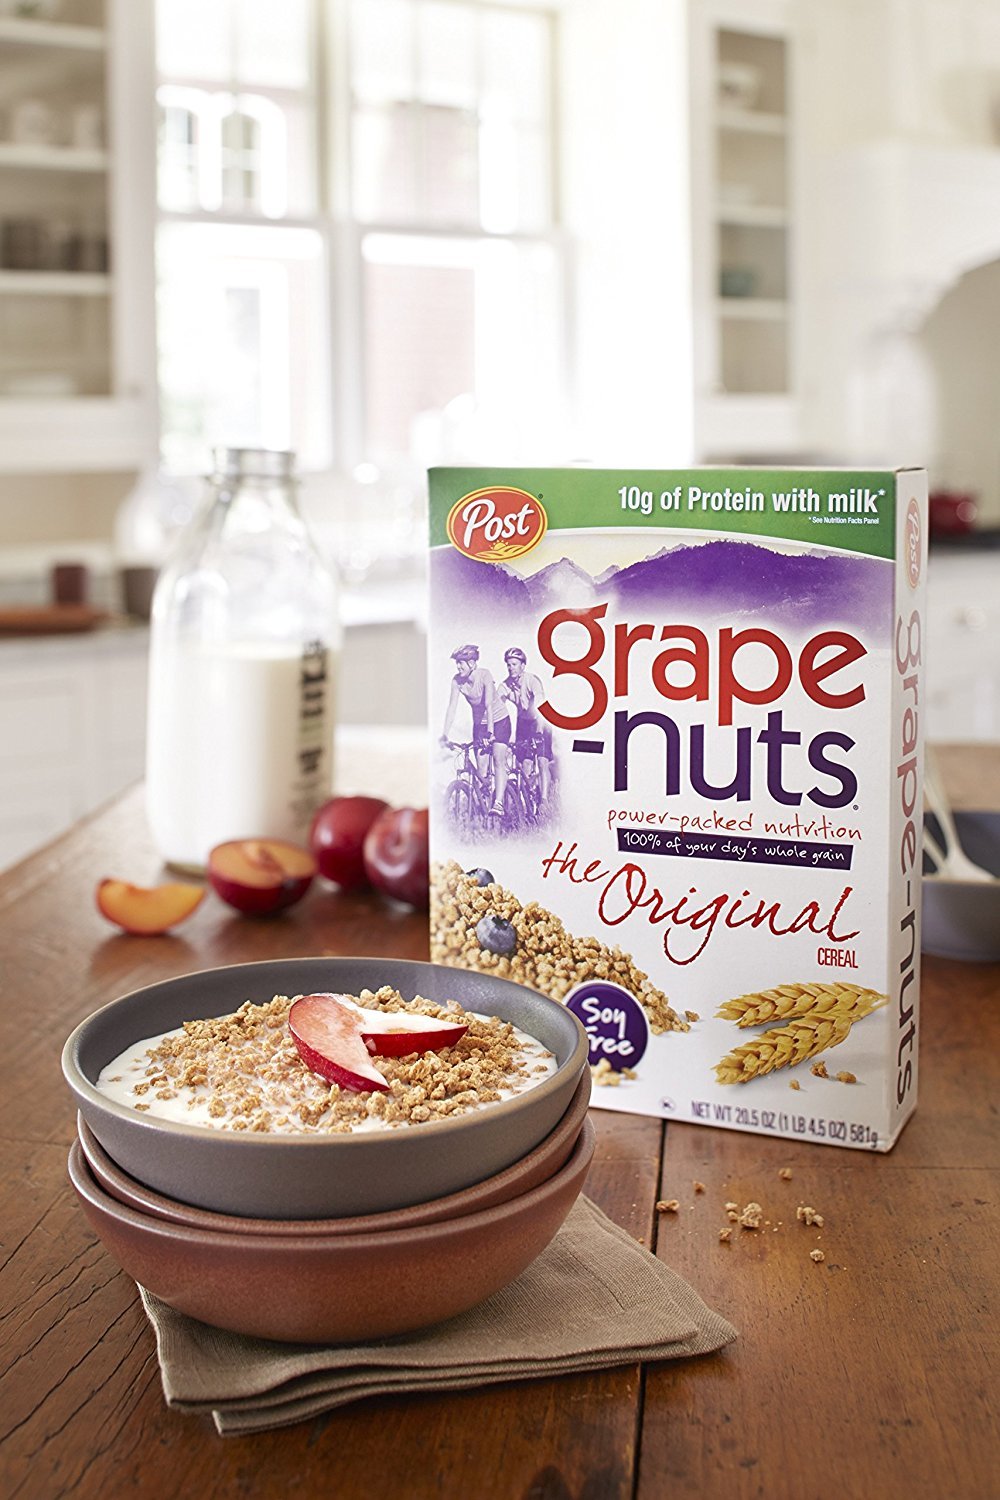 Grape Nuts Wallpapers